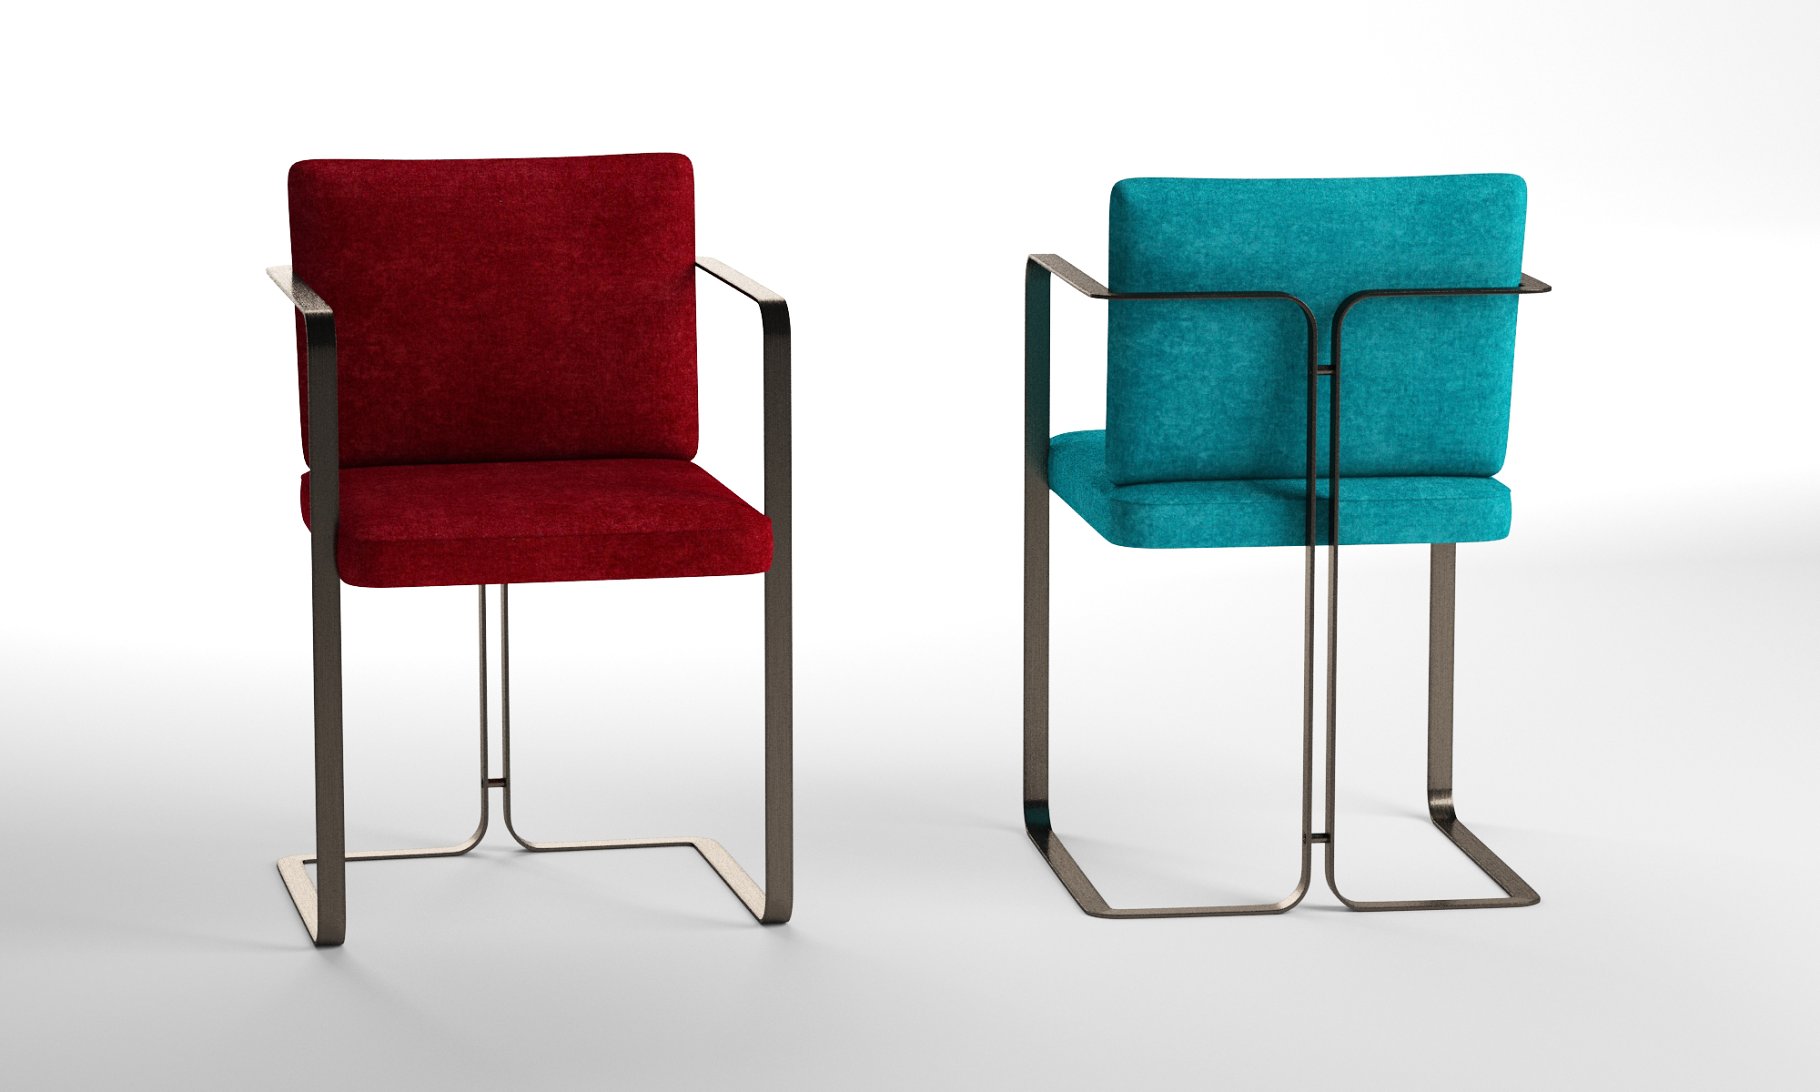 Rendering an amazing 3d model of an armchair in two colors